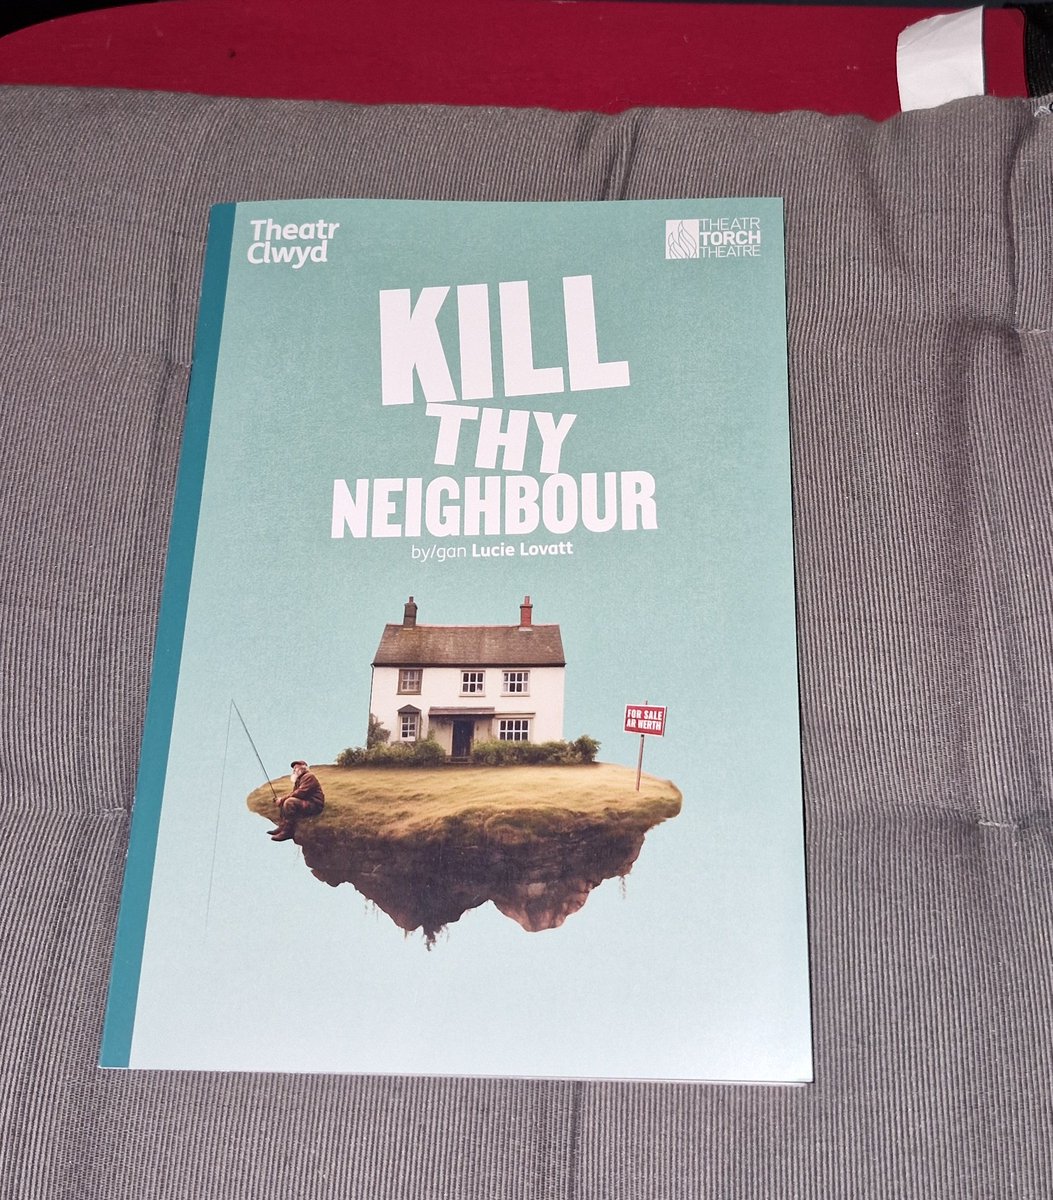 Bit of an excursion to @ClwydTweets for #KillThyNeighbour. Delicious performances in juicy black comedy partially inspired by the second home crisis in rural Wales.